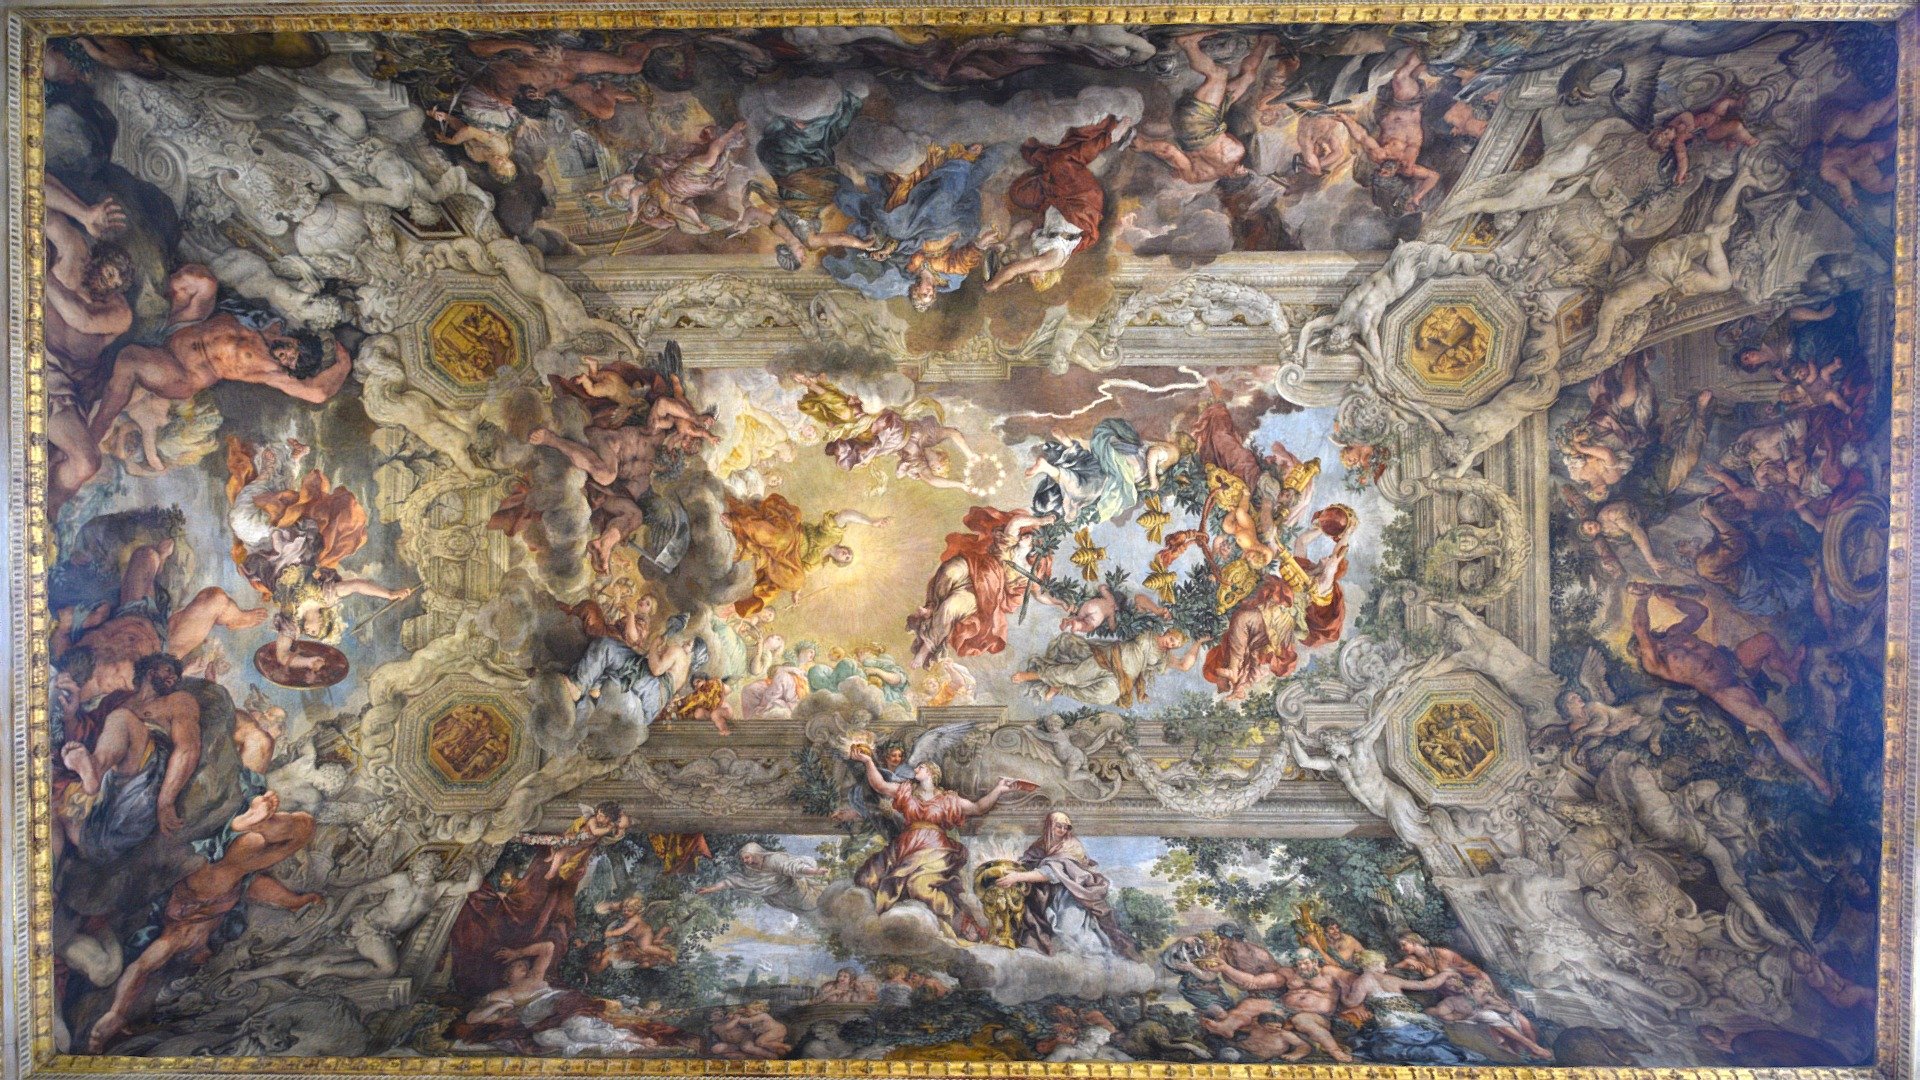 Allegory of Divine Providence and Barberini Power

Pietro da Cortona

c. 1633-1639

Fresco

Galleria Nazionale d'Arte Antica, Palazzo Barberini, Rome

The Allegory of Divine Providence and Barberini Power is a fresco by Italian painter Pietro da Cortona, filling the large ceiling of the grand salon of the Palazzo Barberini in Rome, Italy. Begun in 1633, it was nearly finished in three years; upon Cortona's return from Venice, it was extensively reworked to completion in 1639. The Palazzo, since the 1620s, had been the palatial home of the Barberini family headed by Maffeo Barberini, by then Urban VIII, who had launched an extensive program of refurbishment of the city with art and architecture 3d model